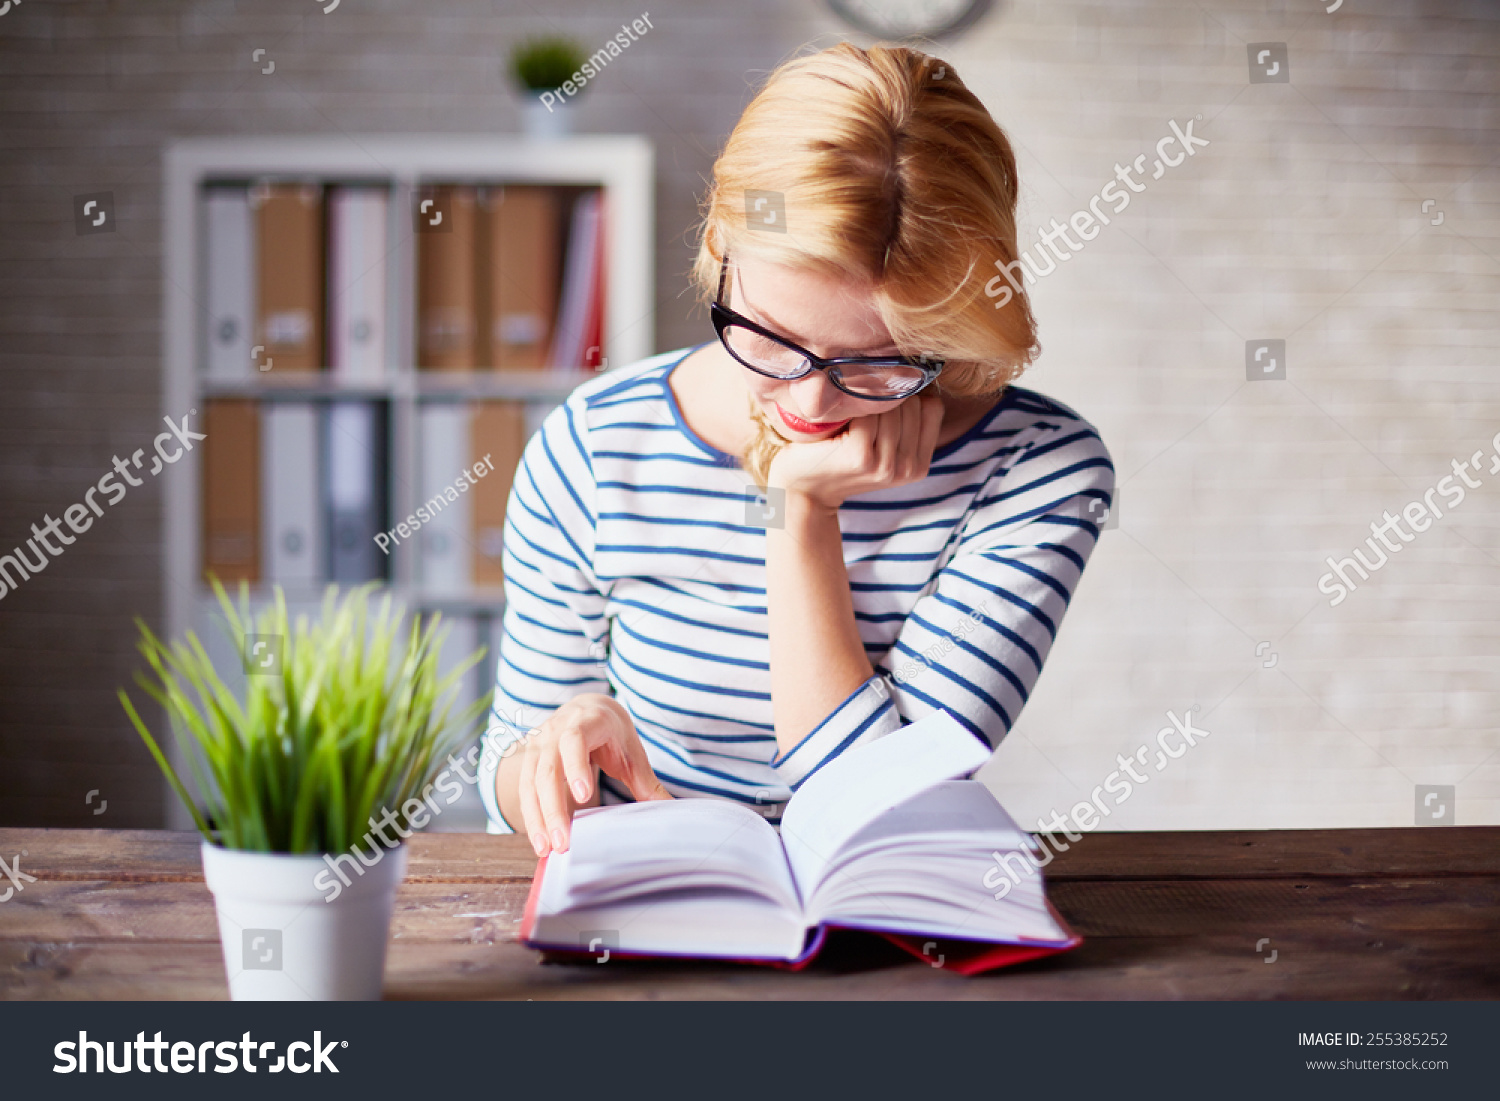 Charming girl sitting by wooden table and reading book #255385252